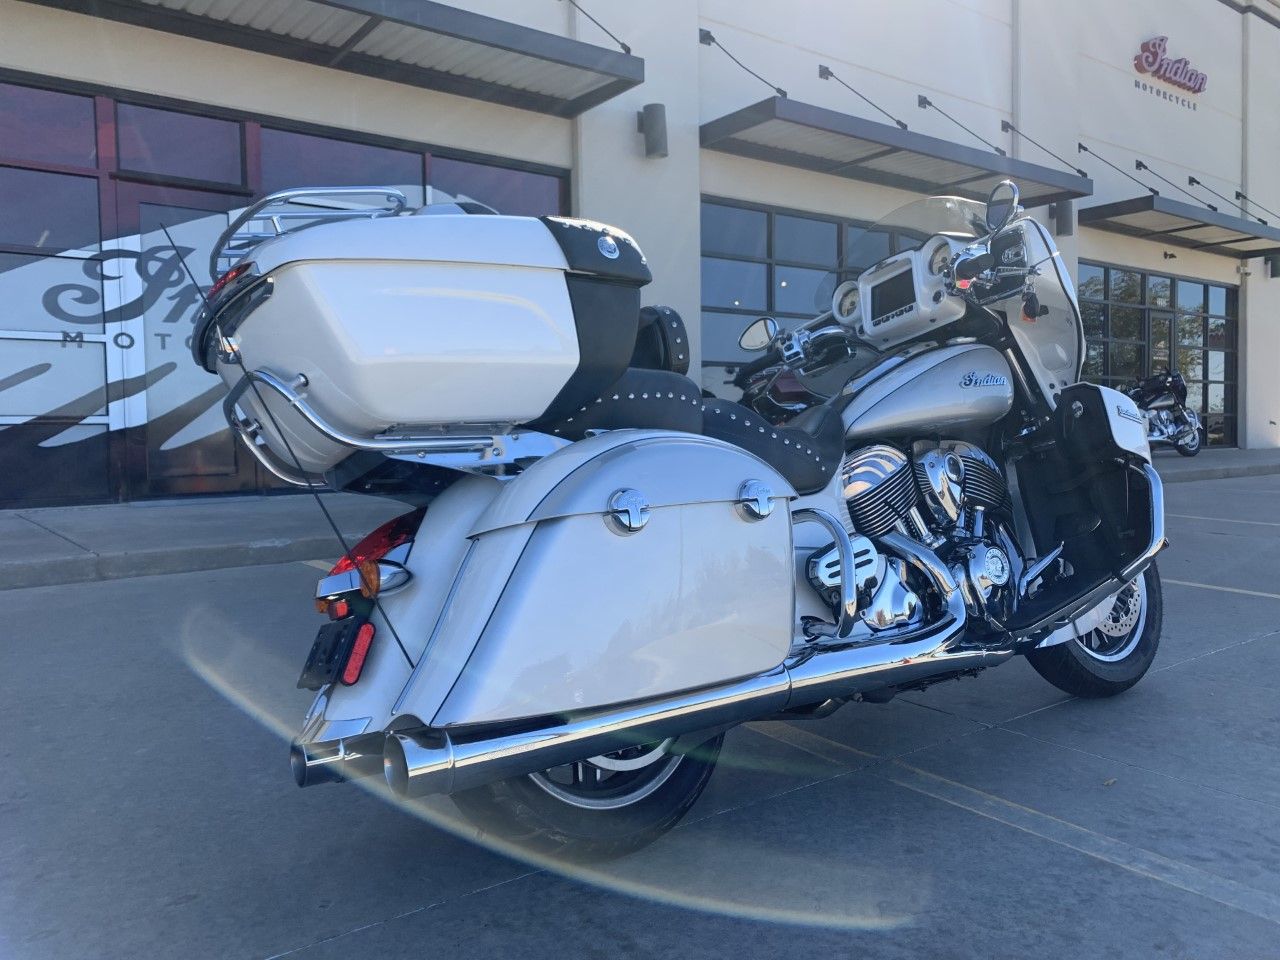 2019 Indian Motorcycle Roadmaster® ABS in Norman, Oklahoma - Photo 8